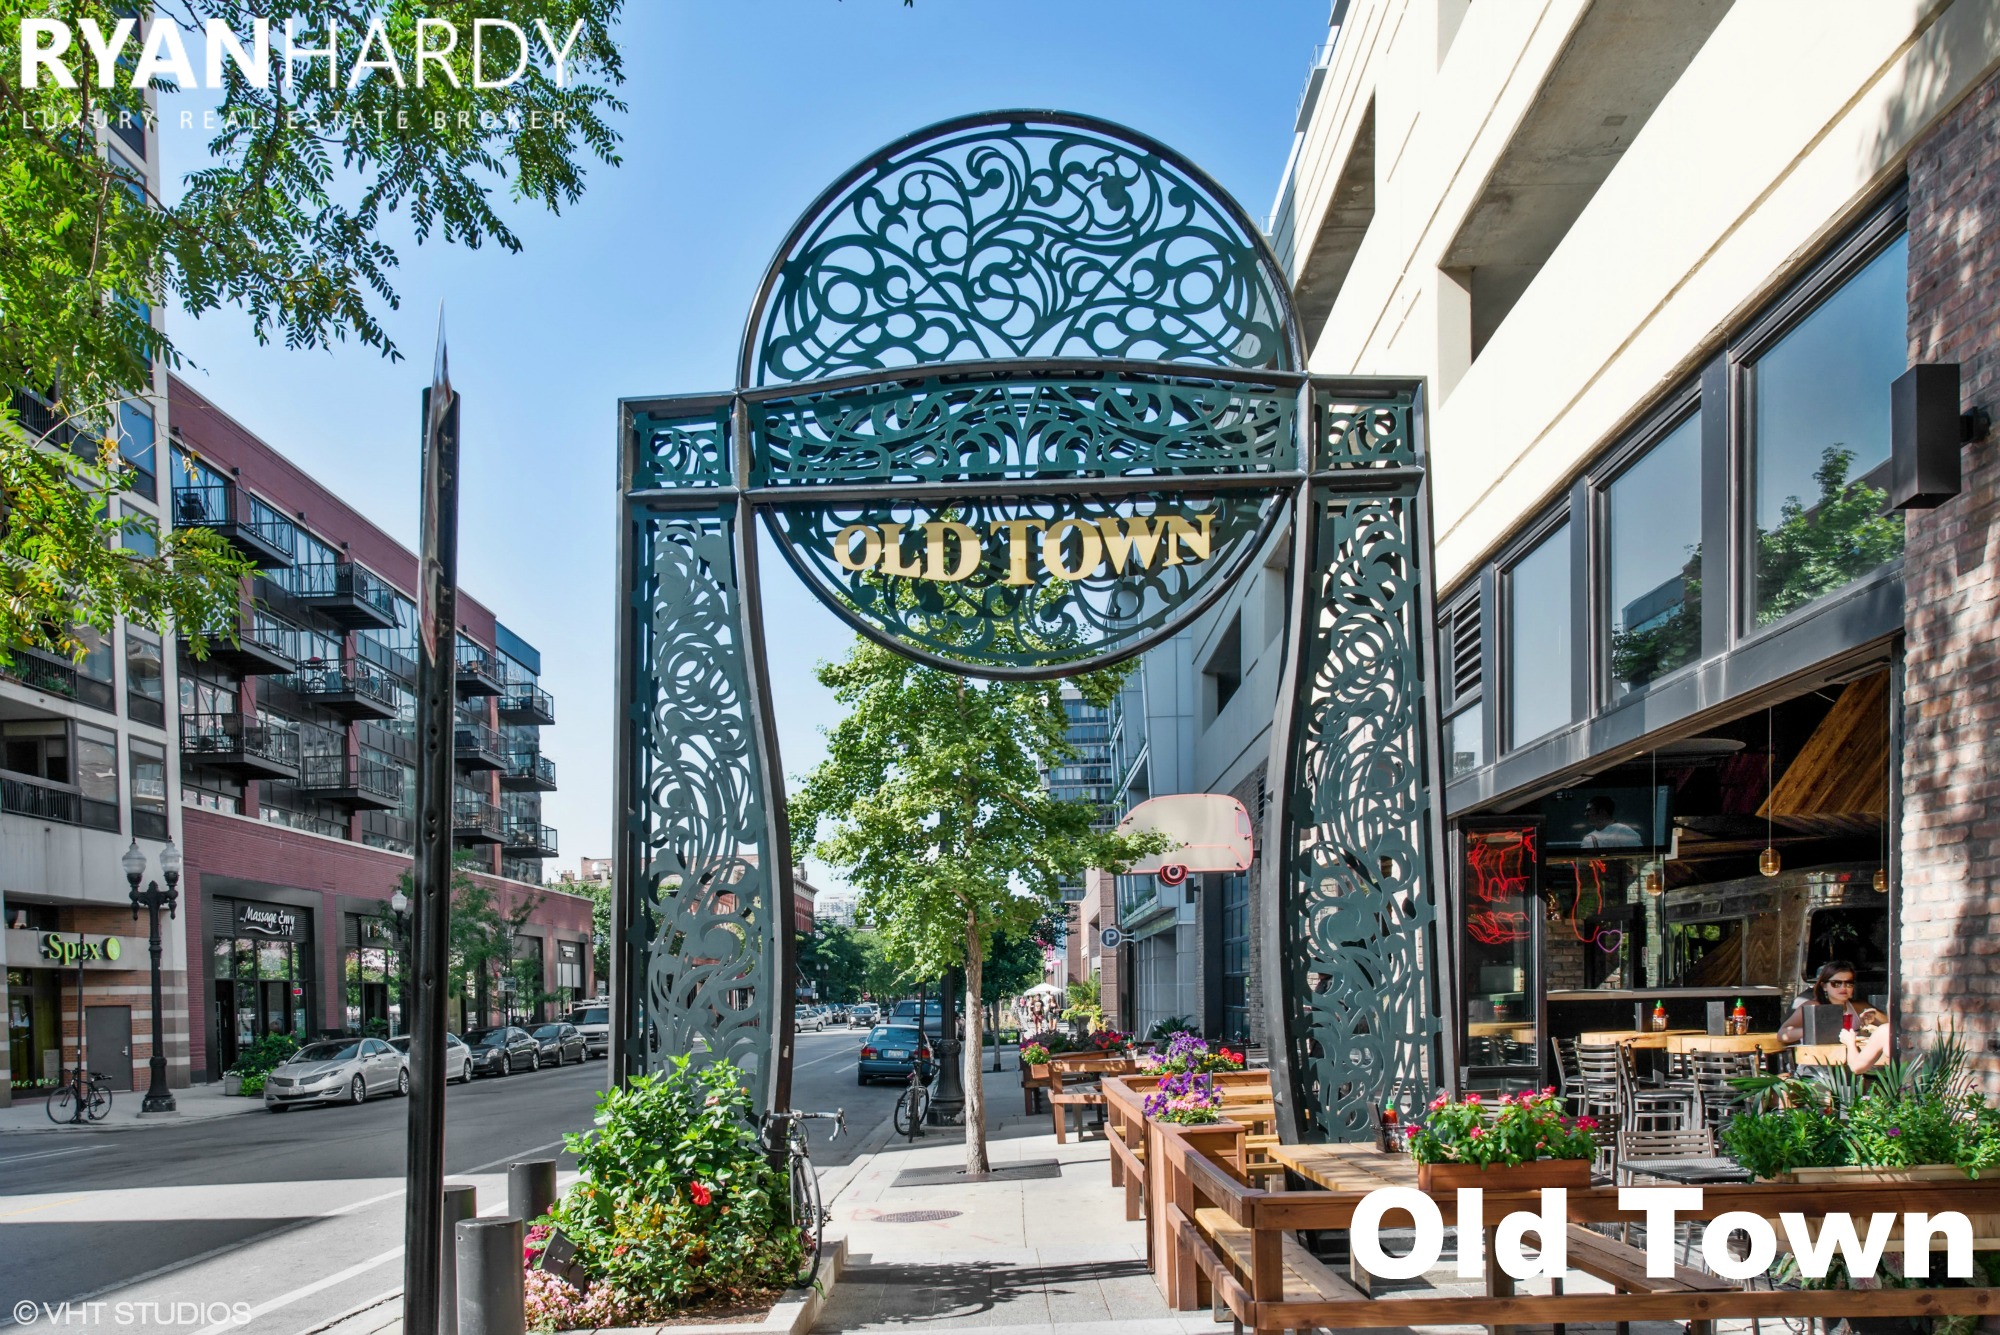 Old Town Chicago Real Estate | Ryan Hardy